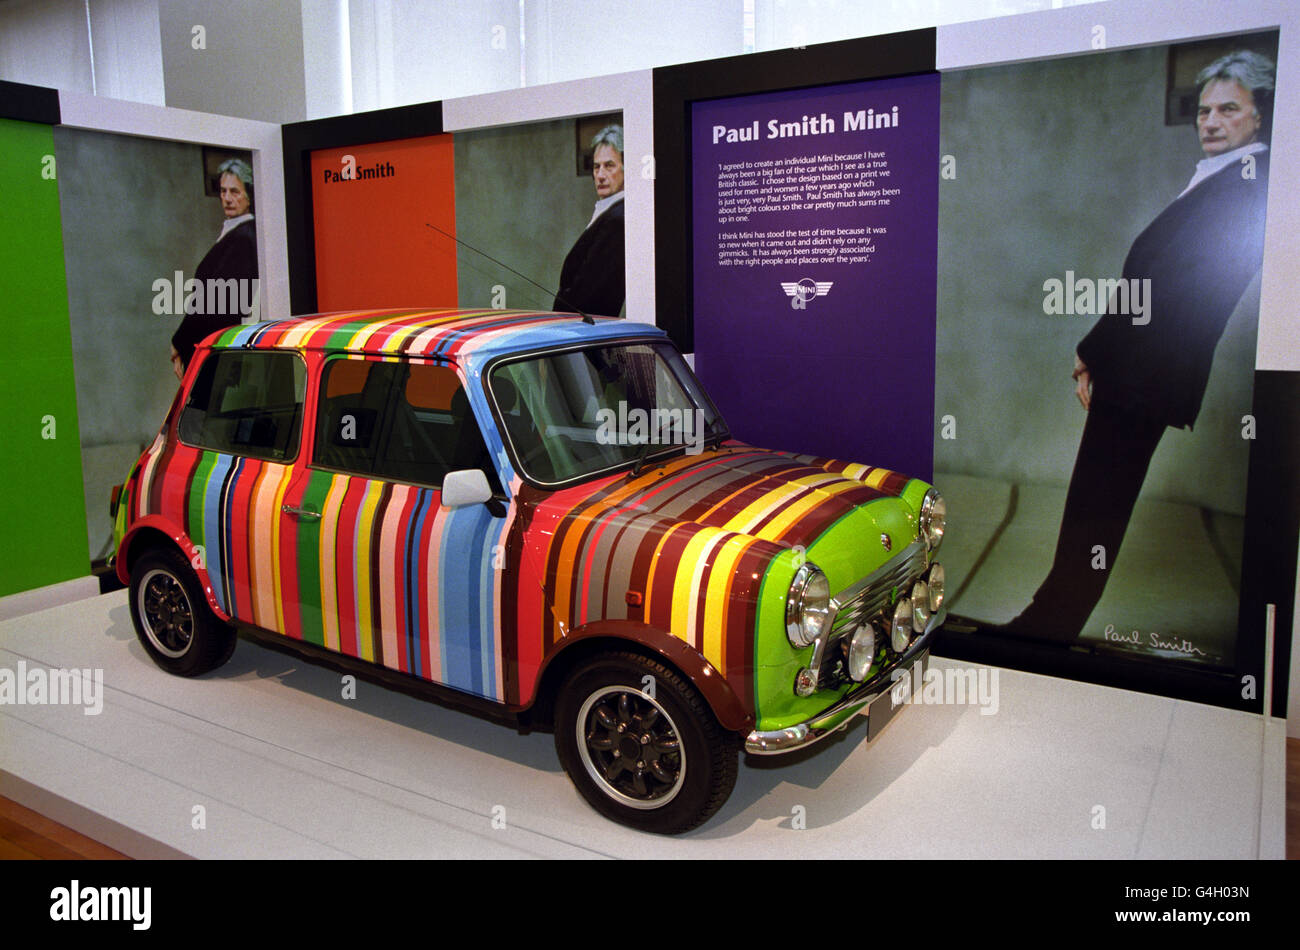 A mini designed by fashion designer Paul Smith, entered in a competition to  celebrate the Mini car which was first unveiled 40 years ago. Paul Smith's  design was based on a fashion